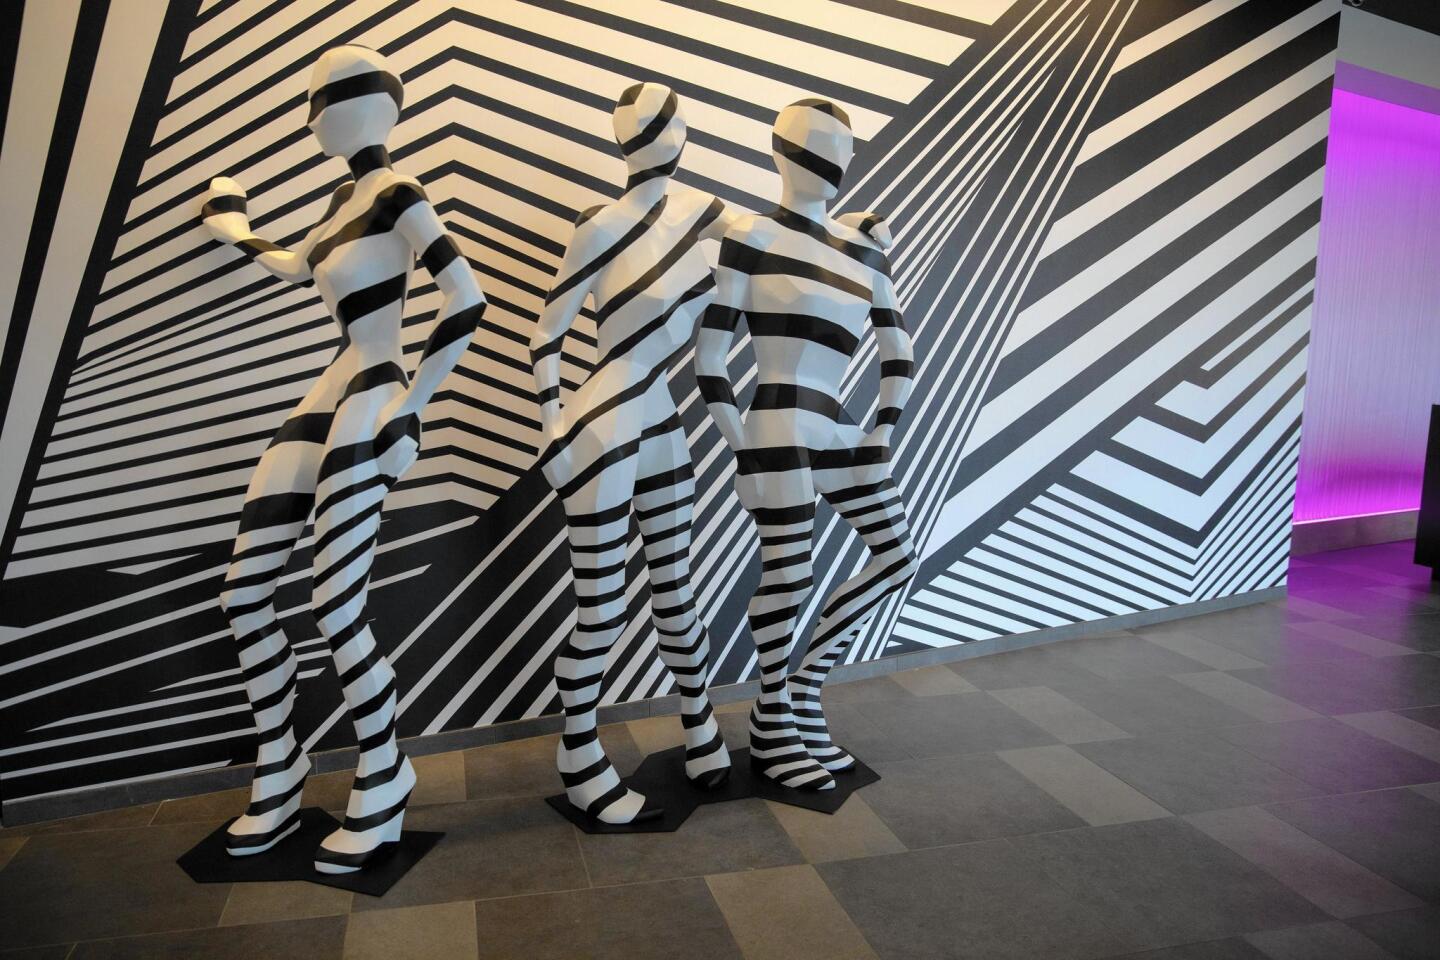 Eight-foot-tall mannequins covered in black-and-white “dazzle camouflage” greet guests in the lobby of The Rose.